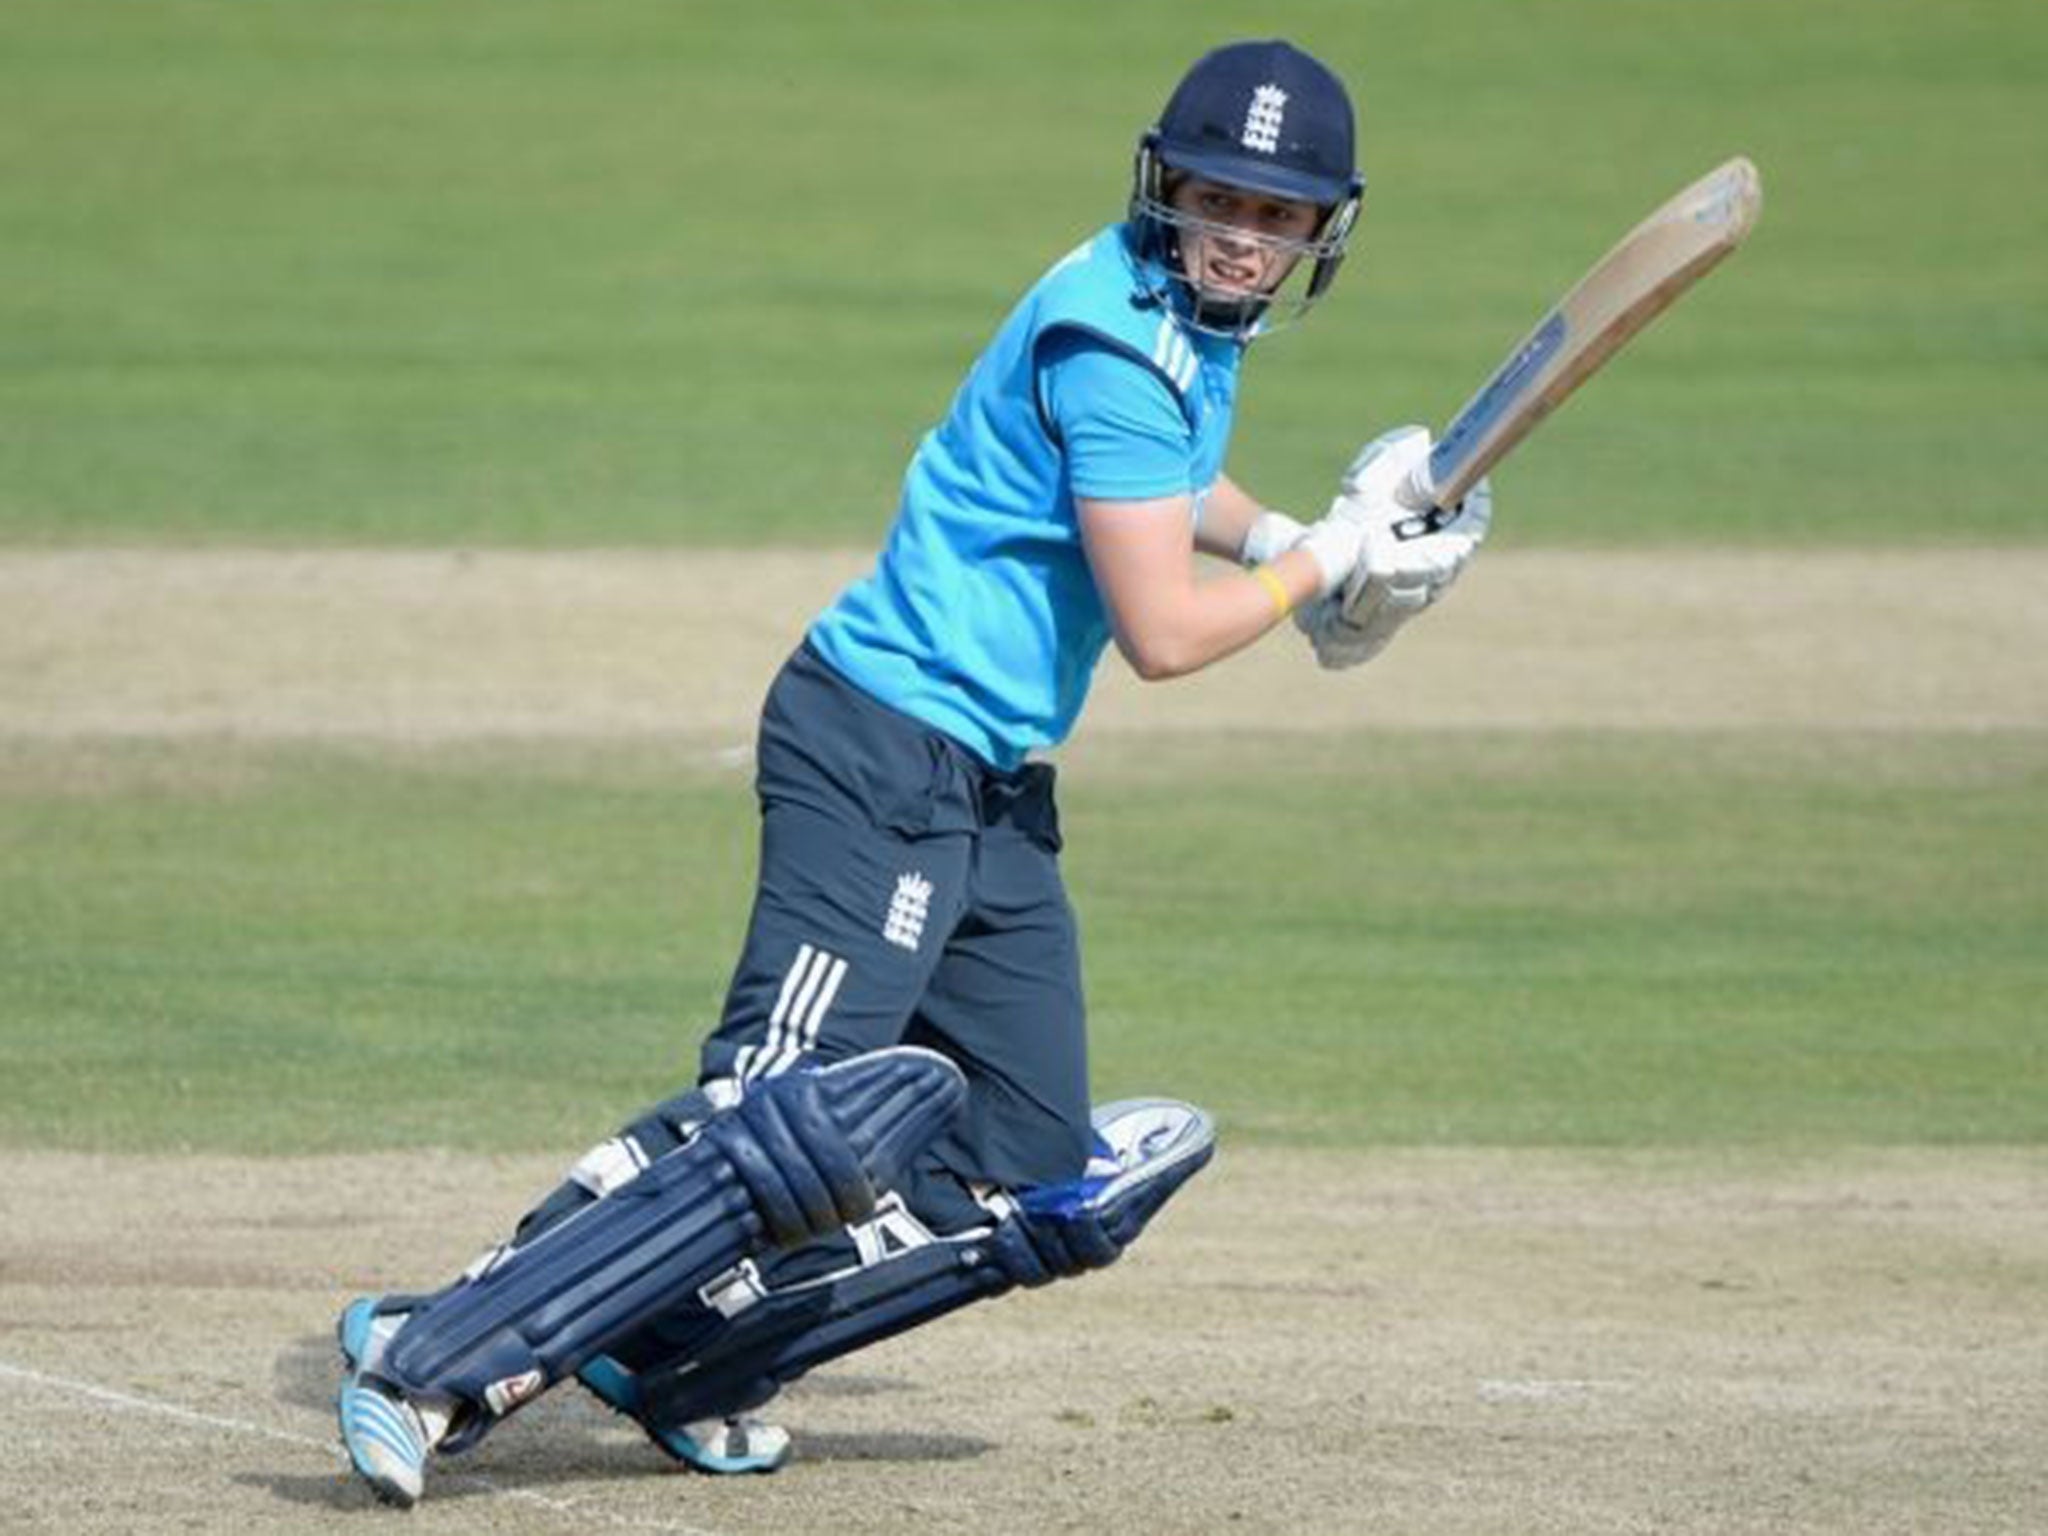 Heather Knight bats during the 1st Royal London ODI between England and India